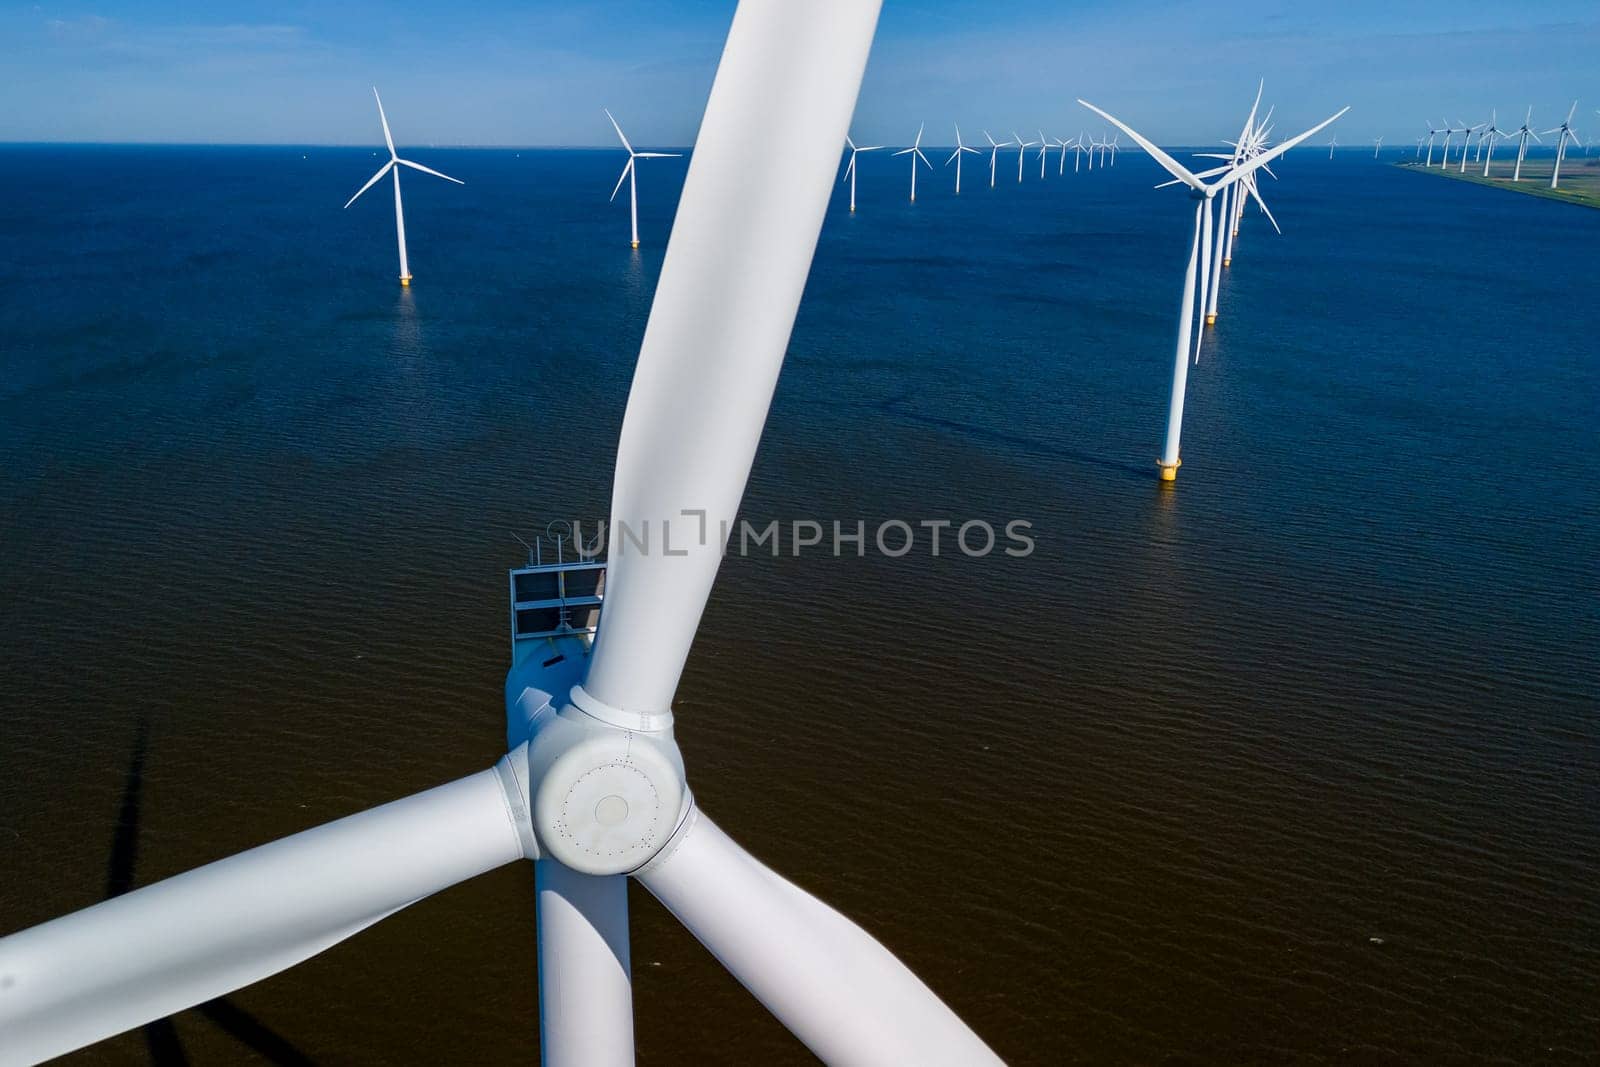 A group of wind turbines gracefully spinning in the ocean, harnessing the power of the wind in Flevoland, Netherlands during the vibrant season of Spring. Windmill turbines green energy in the ocean